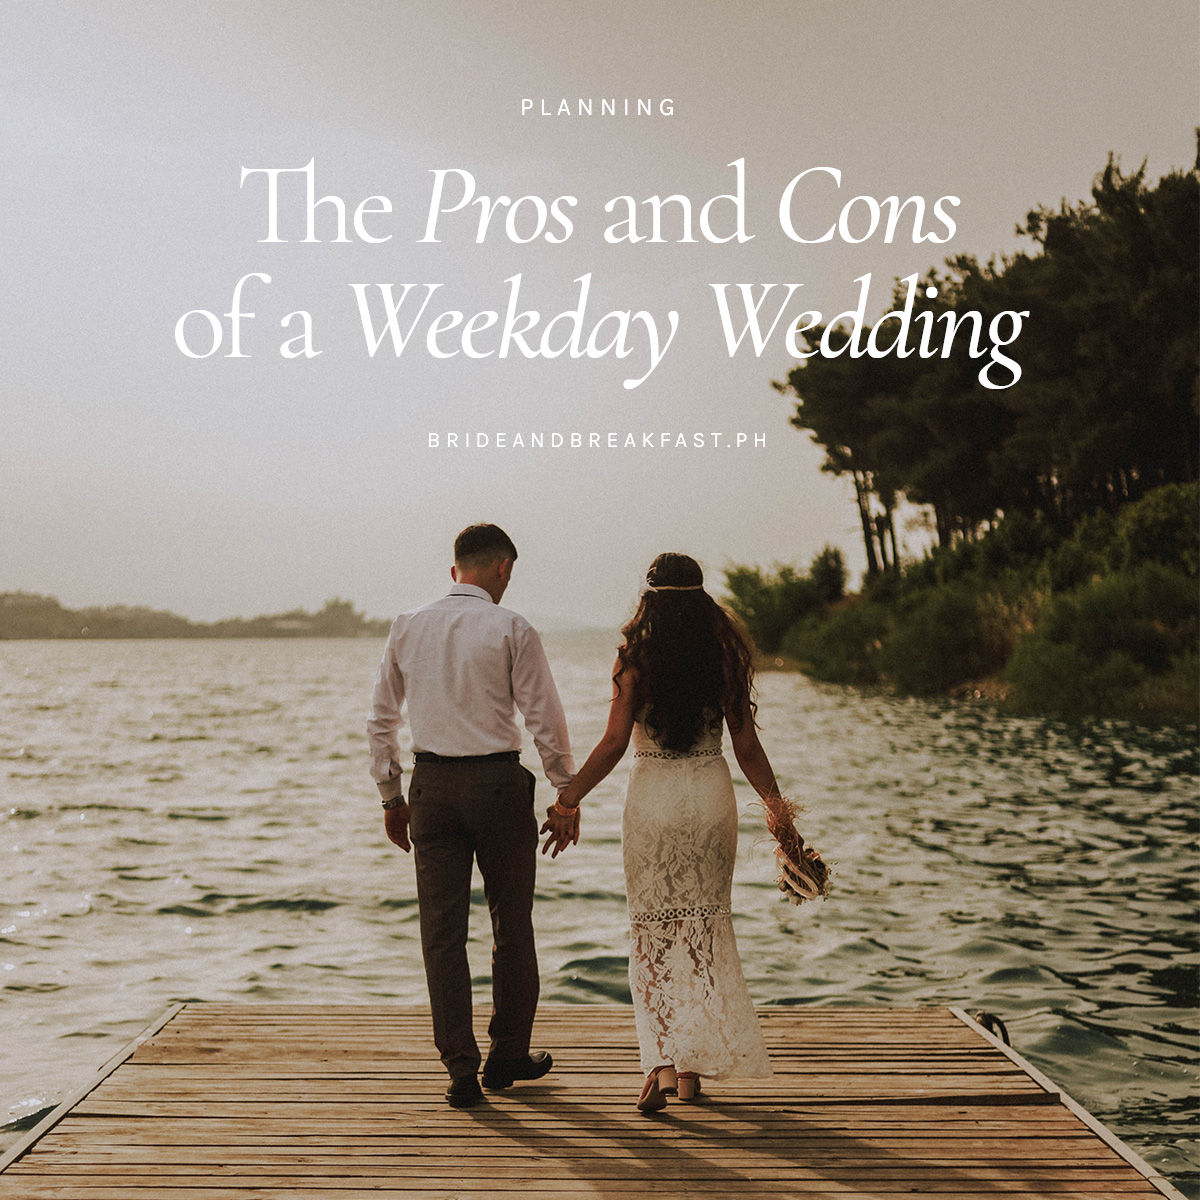 The Pros and Cons of a Weekday Wedding